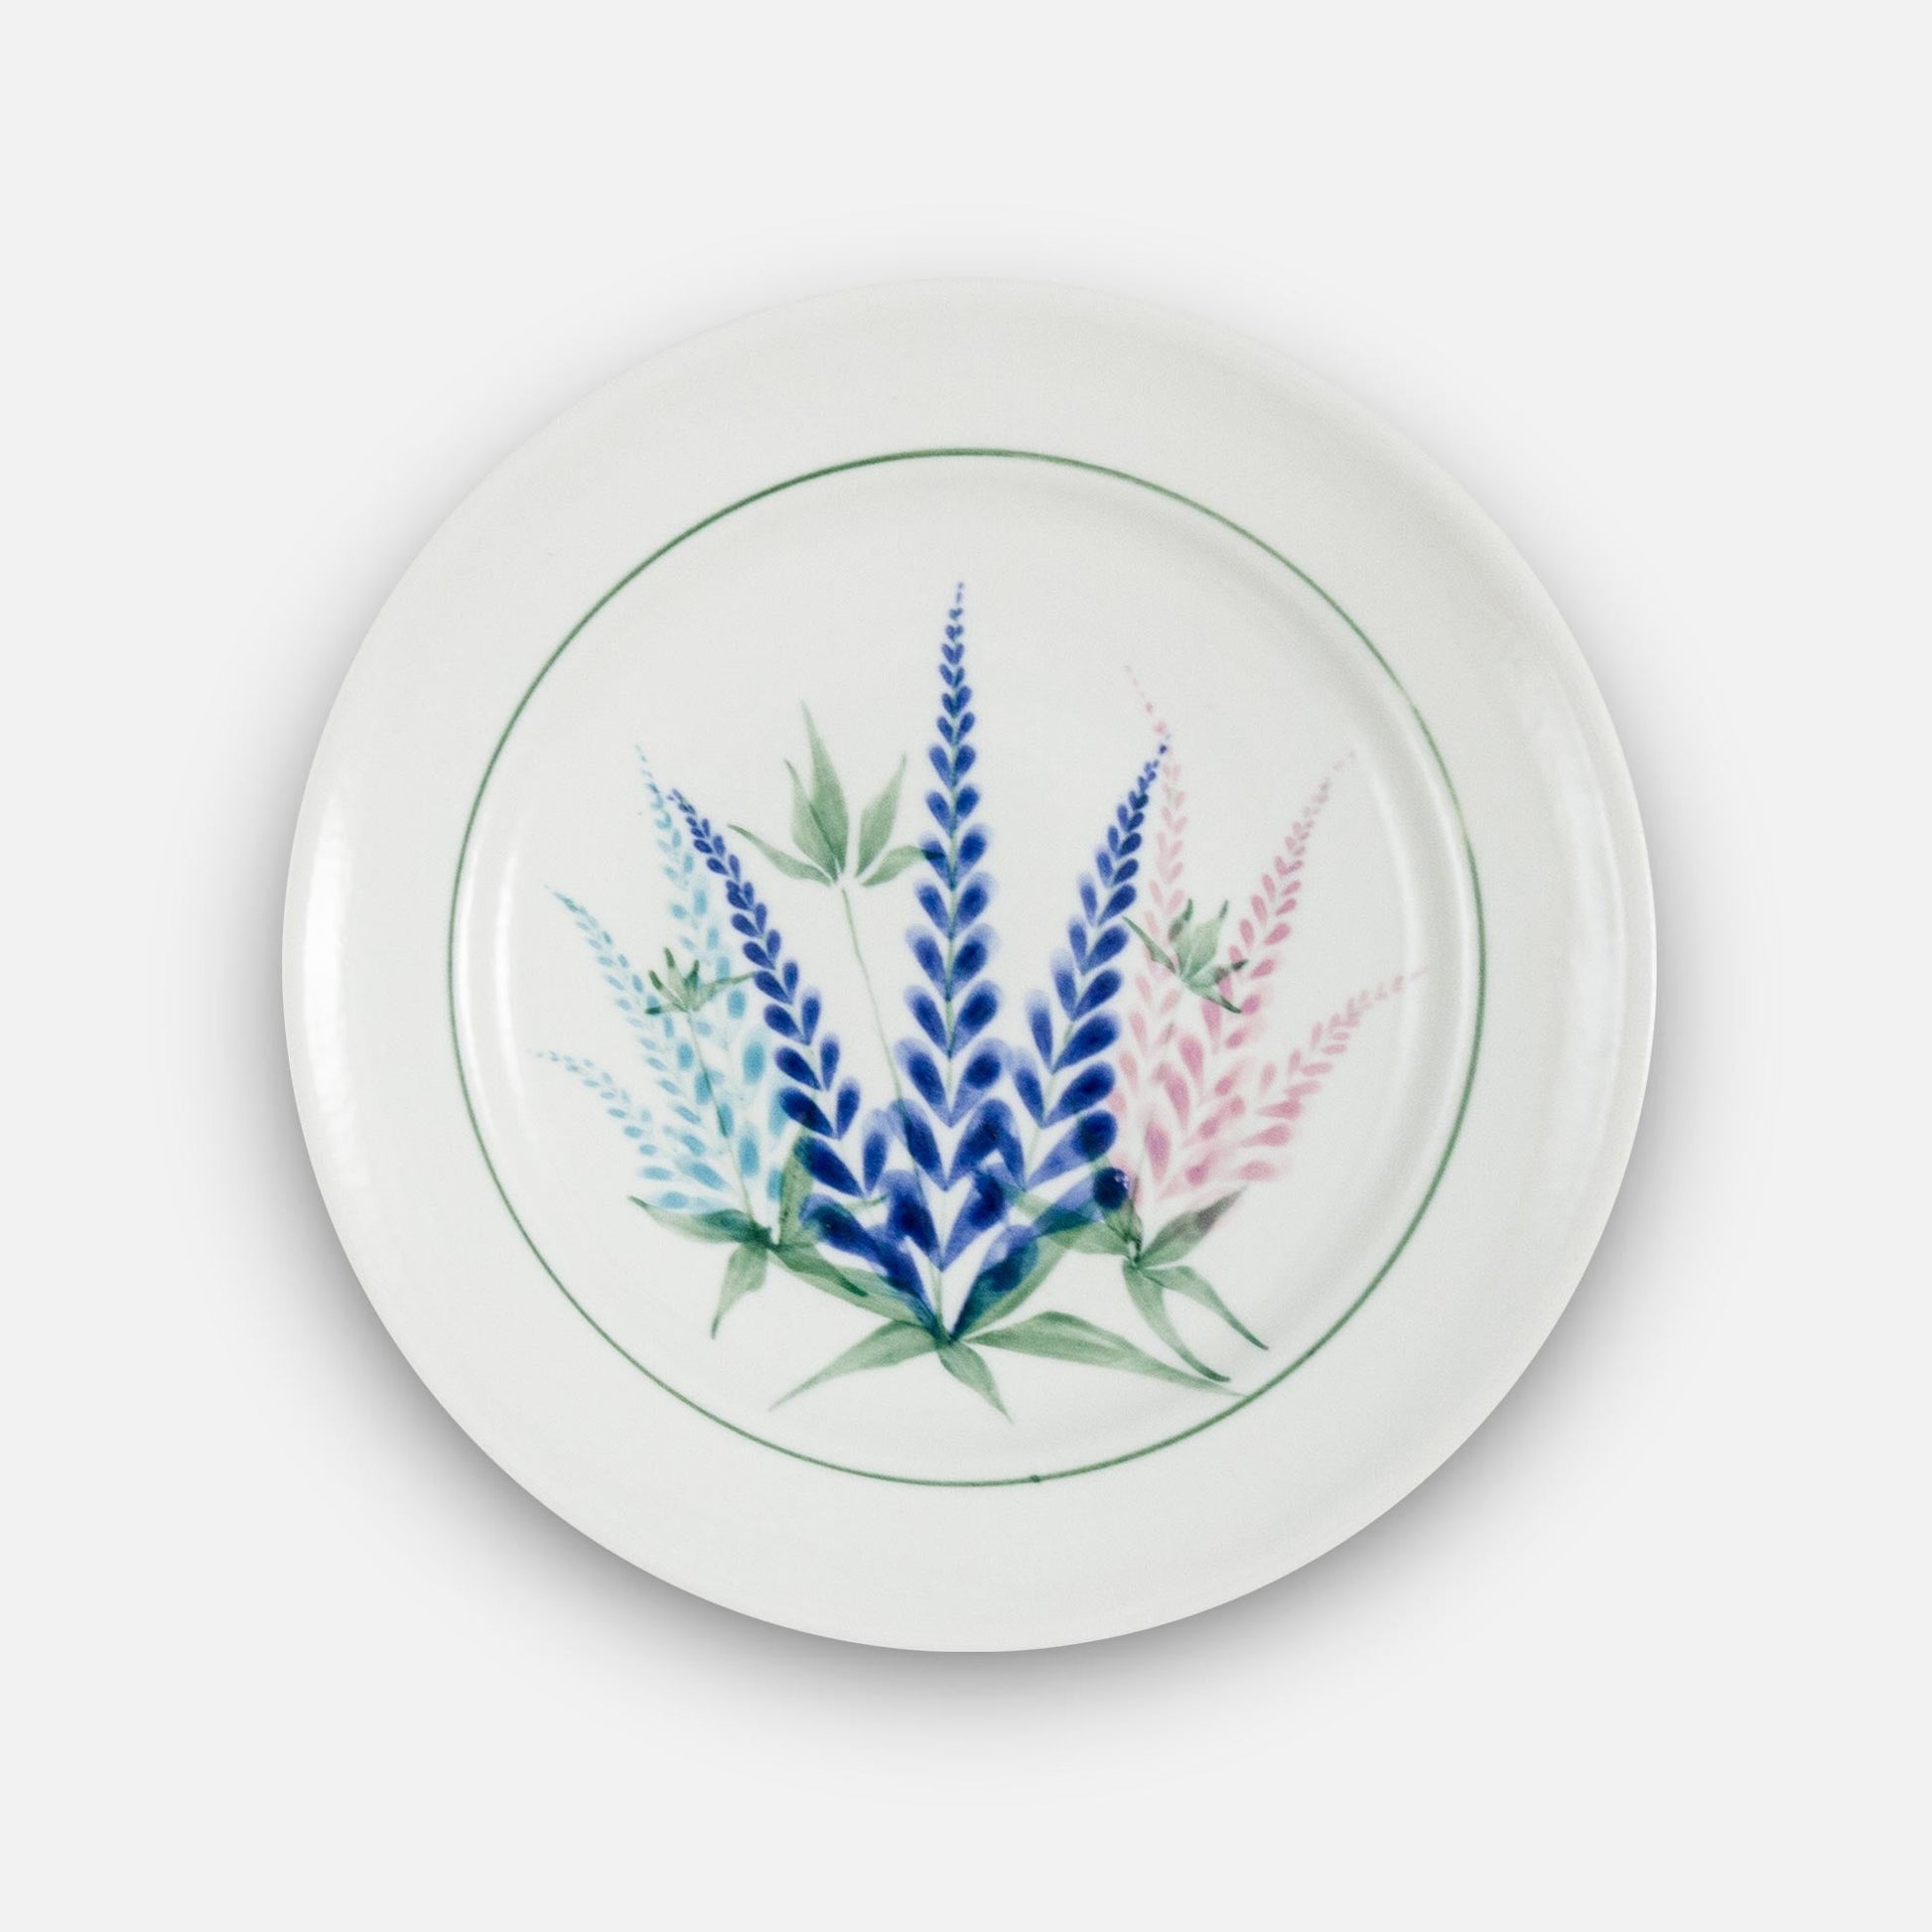 Handmade Pottery Rimless Dessert Plate made by Georgetown Pottery in Maine in Lupine pattern